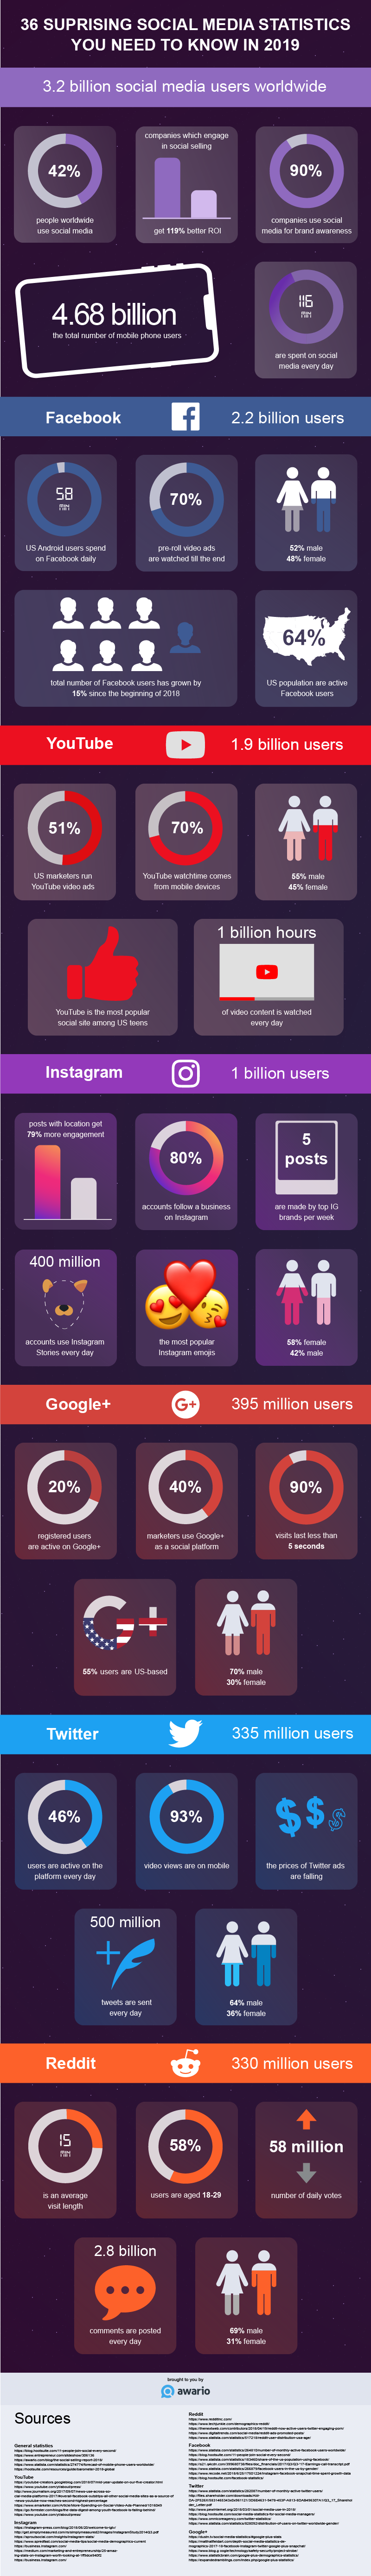 Infographic 36 surprising social media statistics you should know in 2019